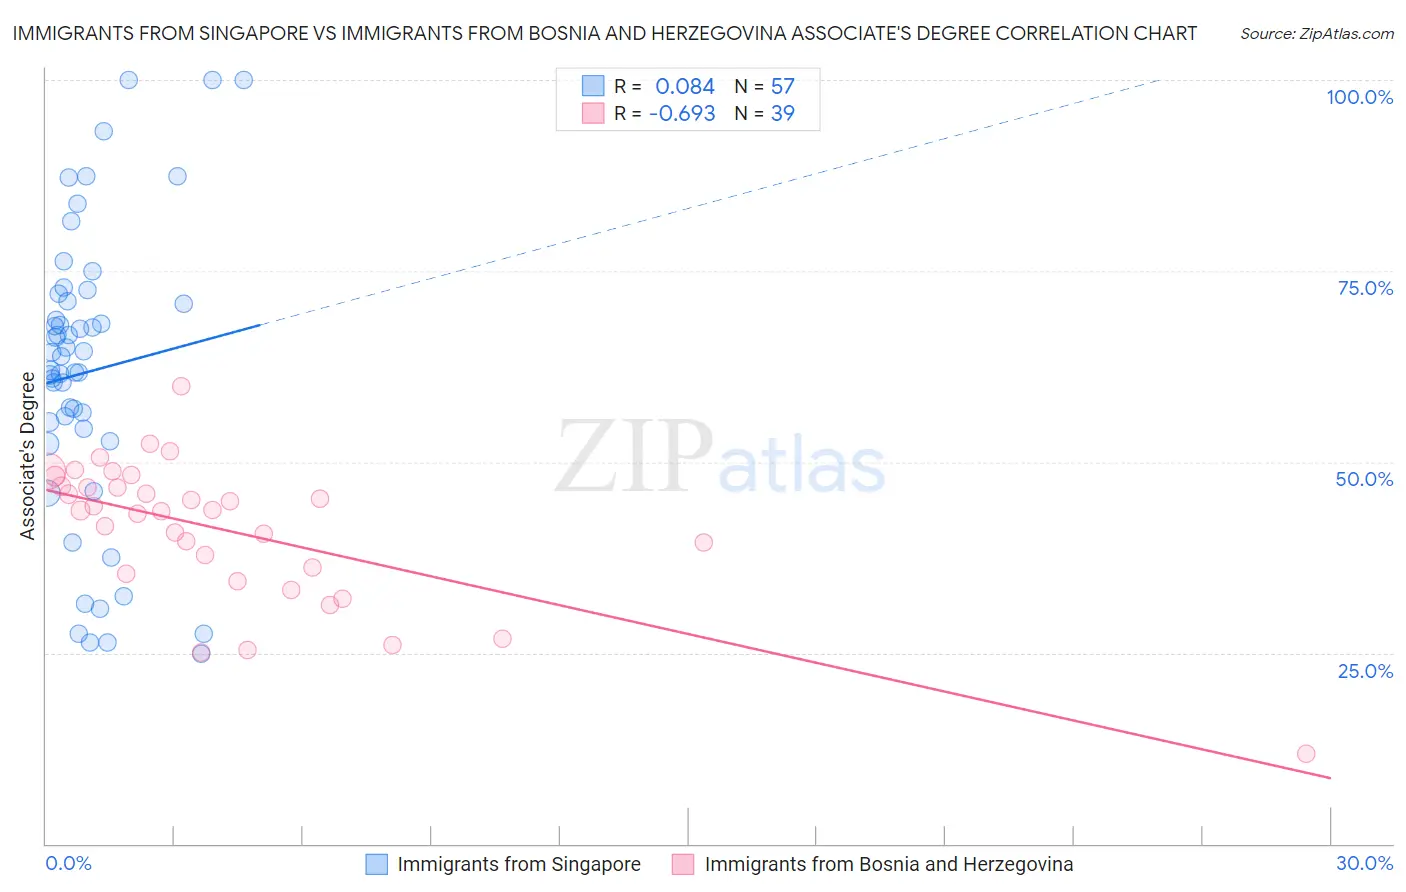 Immigrants from Singapore vs Immigrants from Bosnia and Herzegovina Associate's Degree